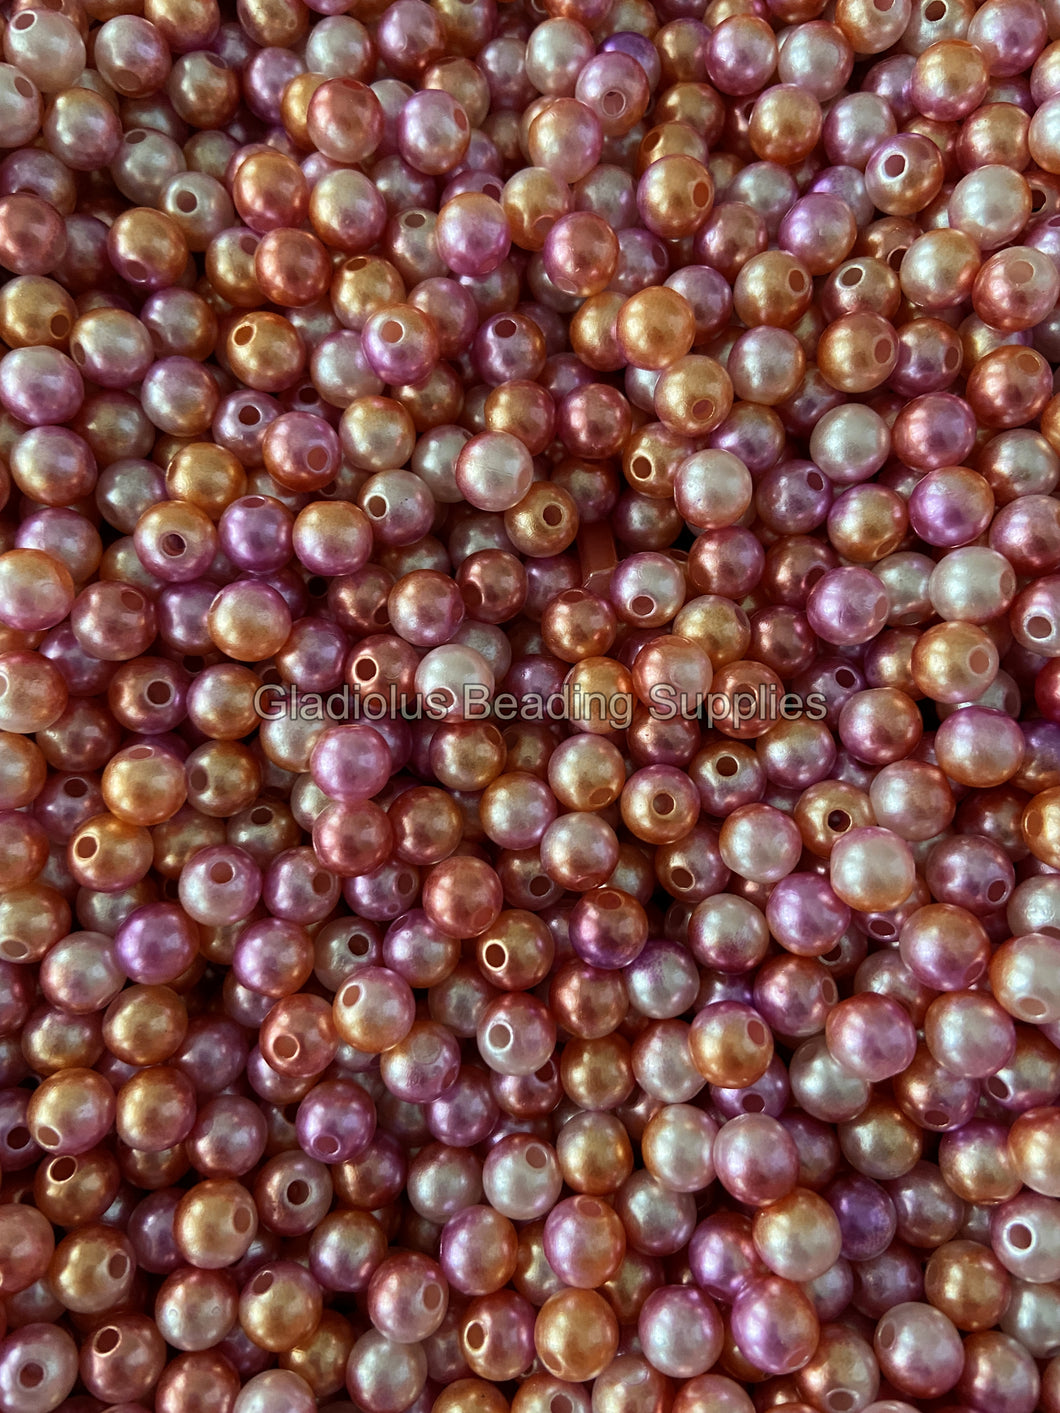 100 pcs 8mm Golden Rainbow Acrylic Beads - Multicolor Beads - For Jewelry Making #70